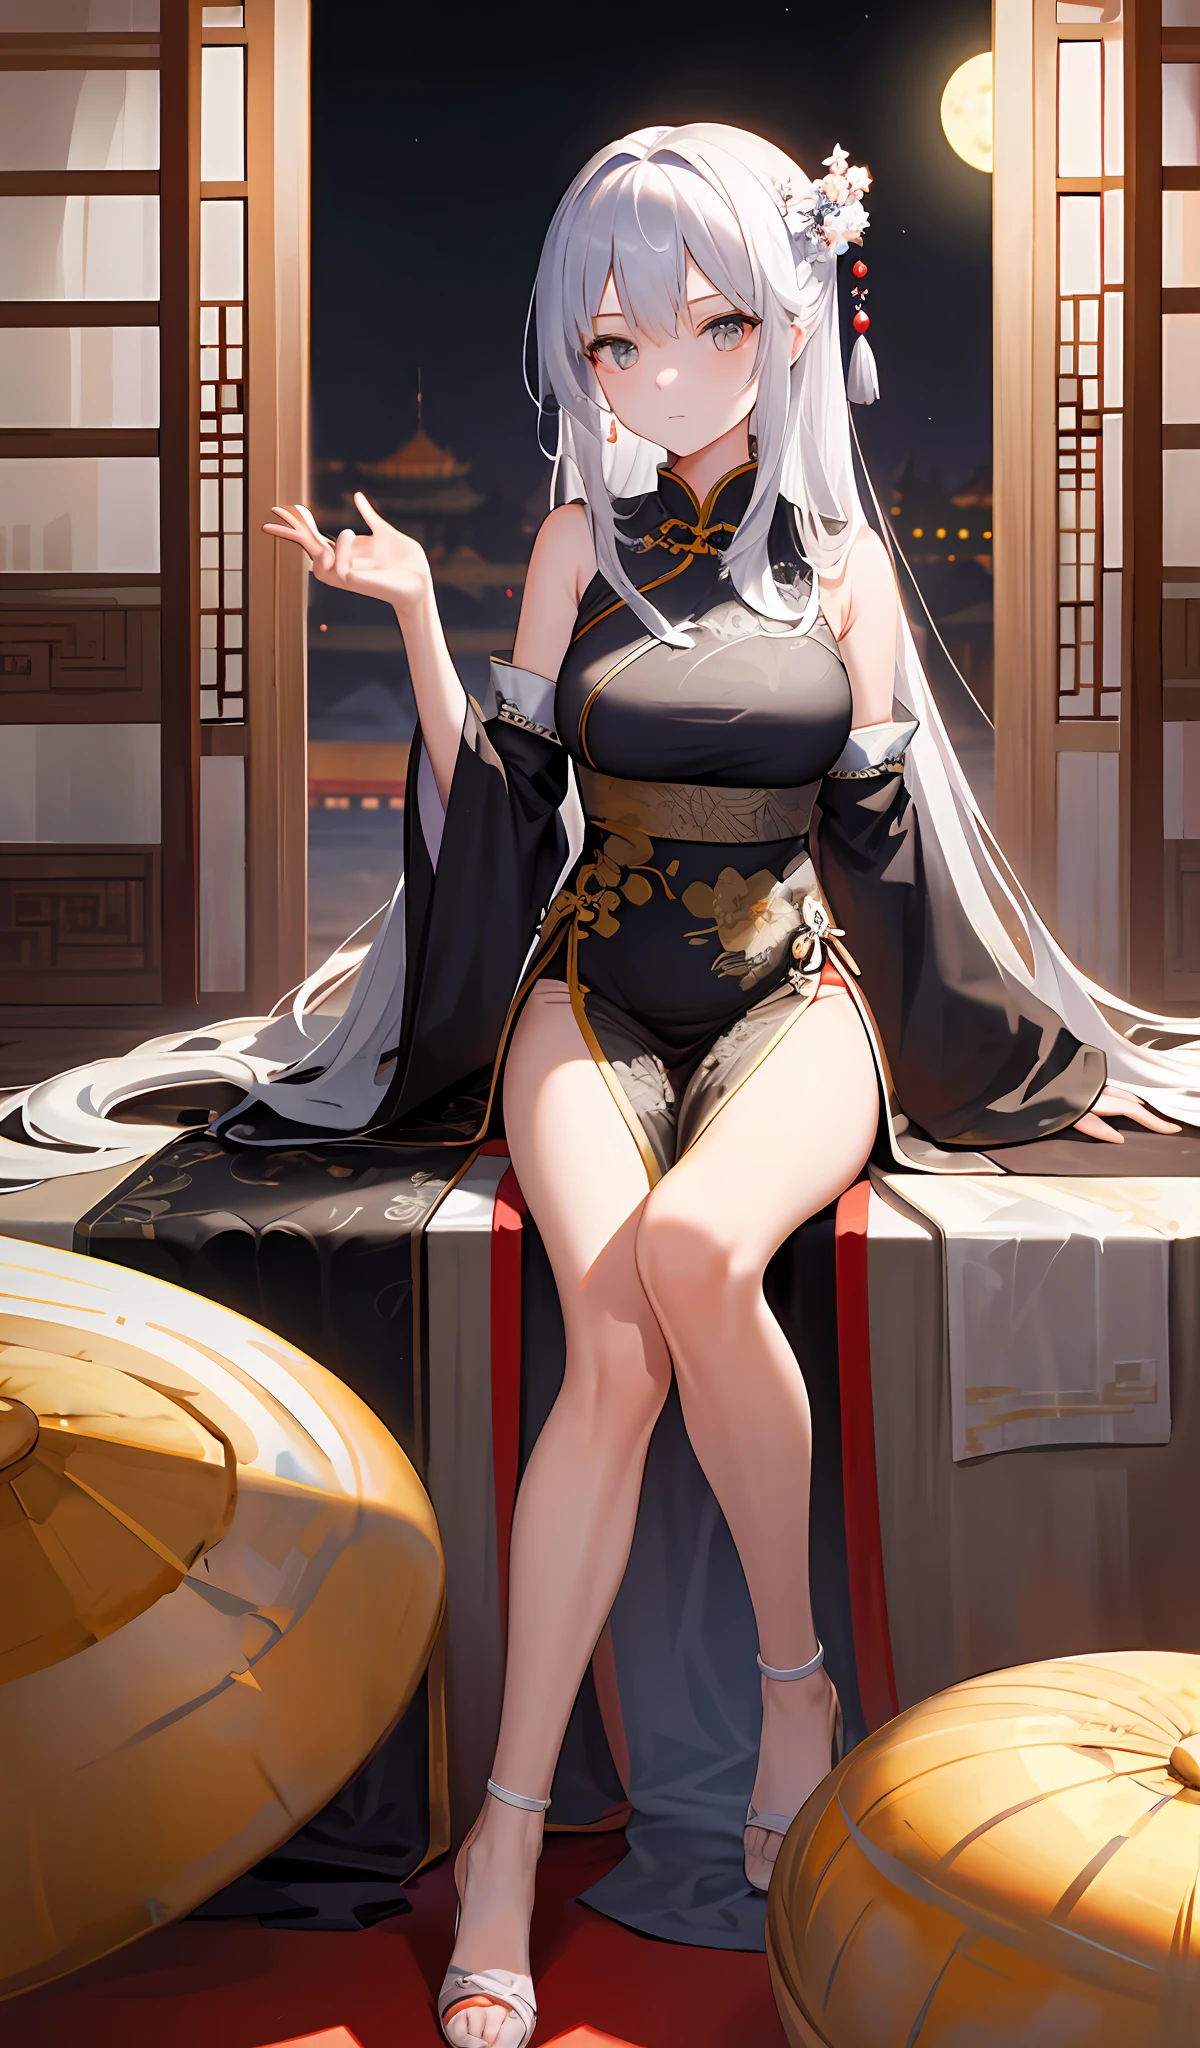 Masterpiece, Superb Product, Night, Full Moon, 1 Woman, Mature Woman, Chinese Style, Ancient China, Sister, Royal Sister, Cold Face, Expressionless, Silver-white Long-haired Woman